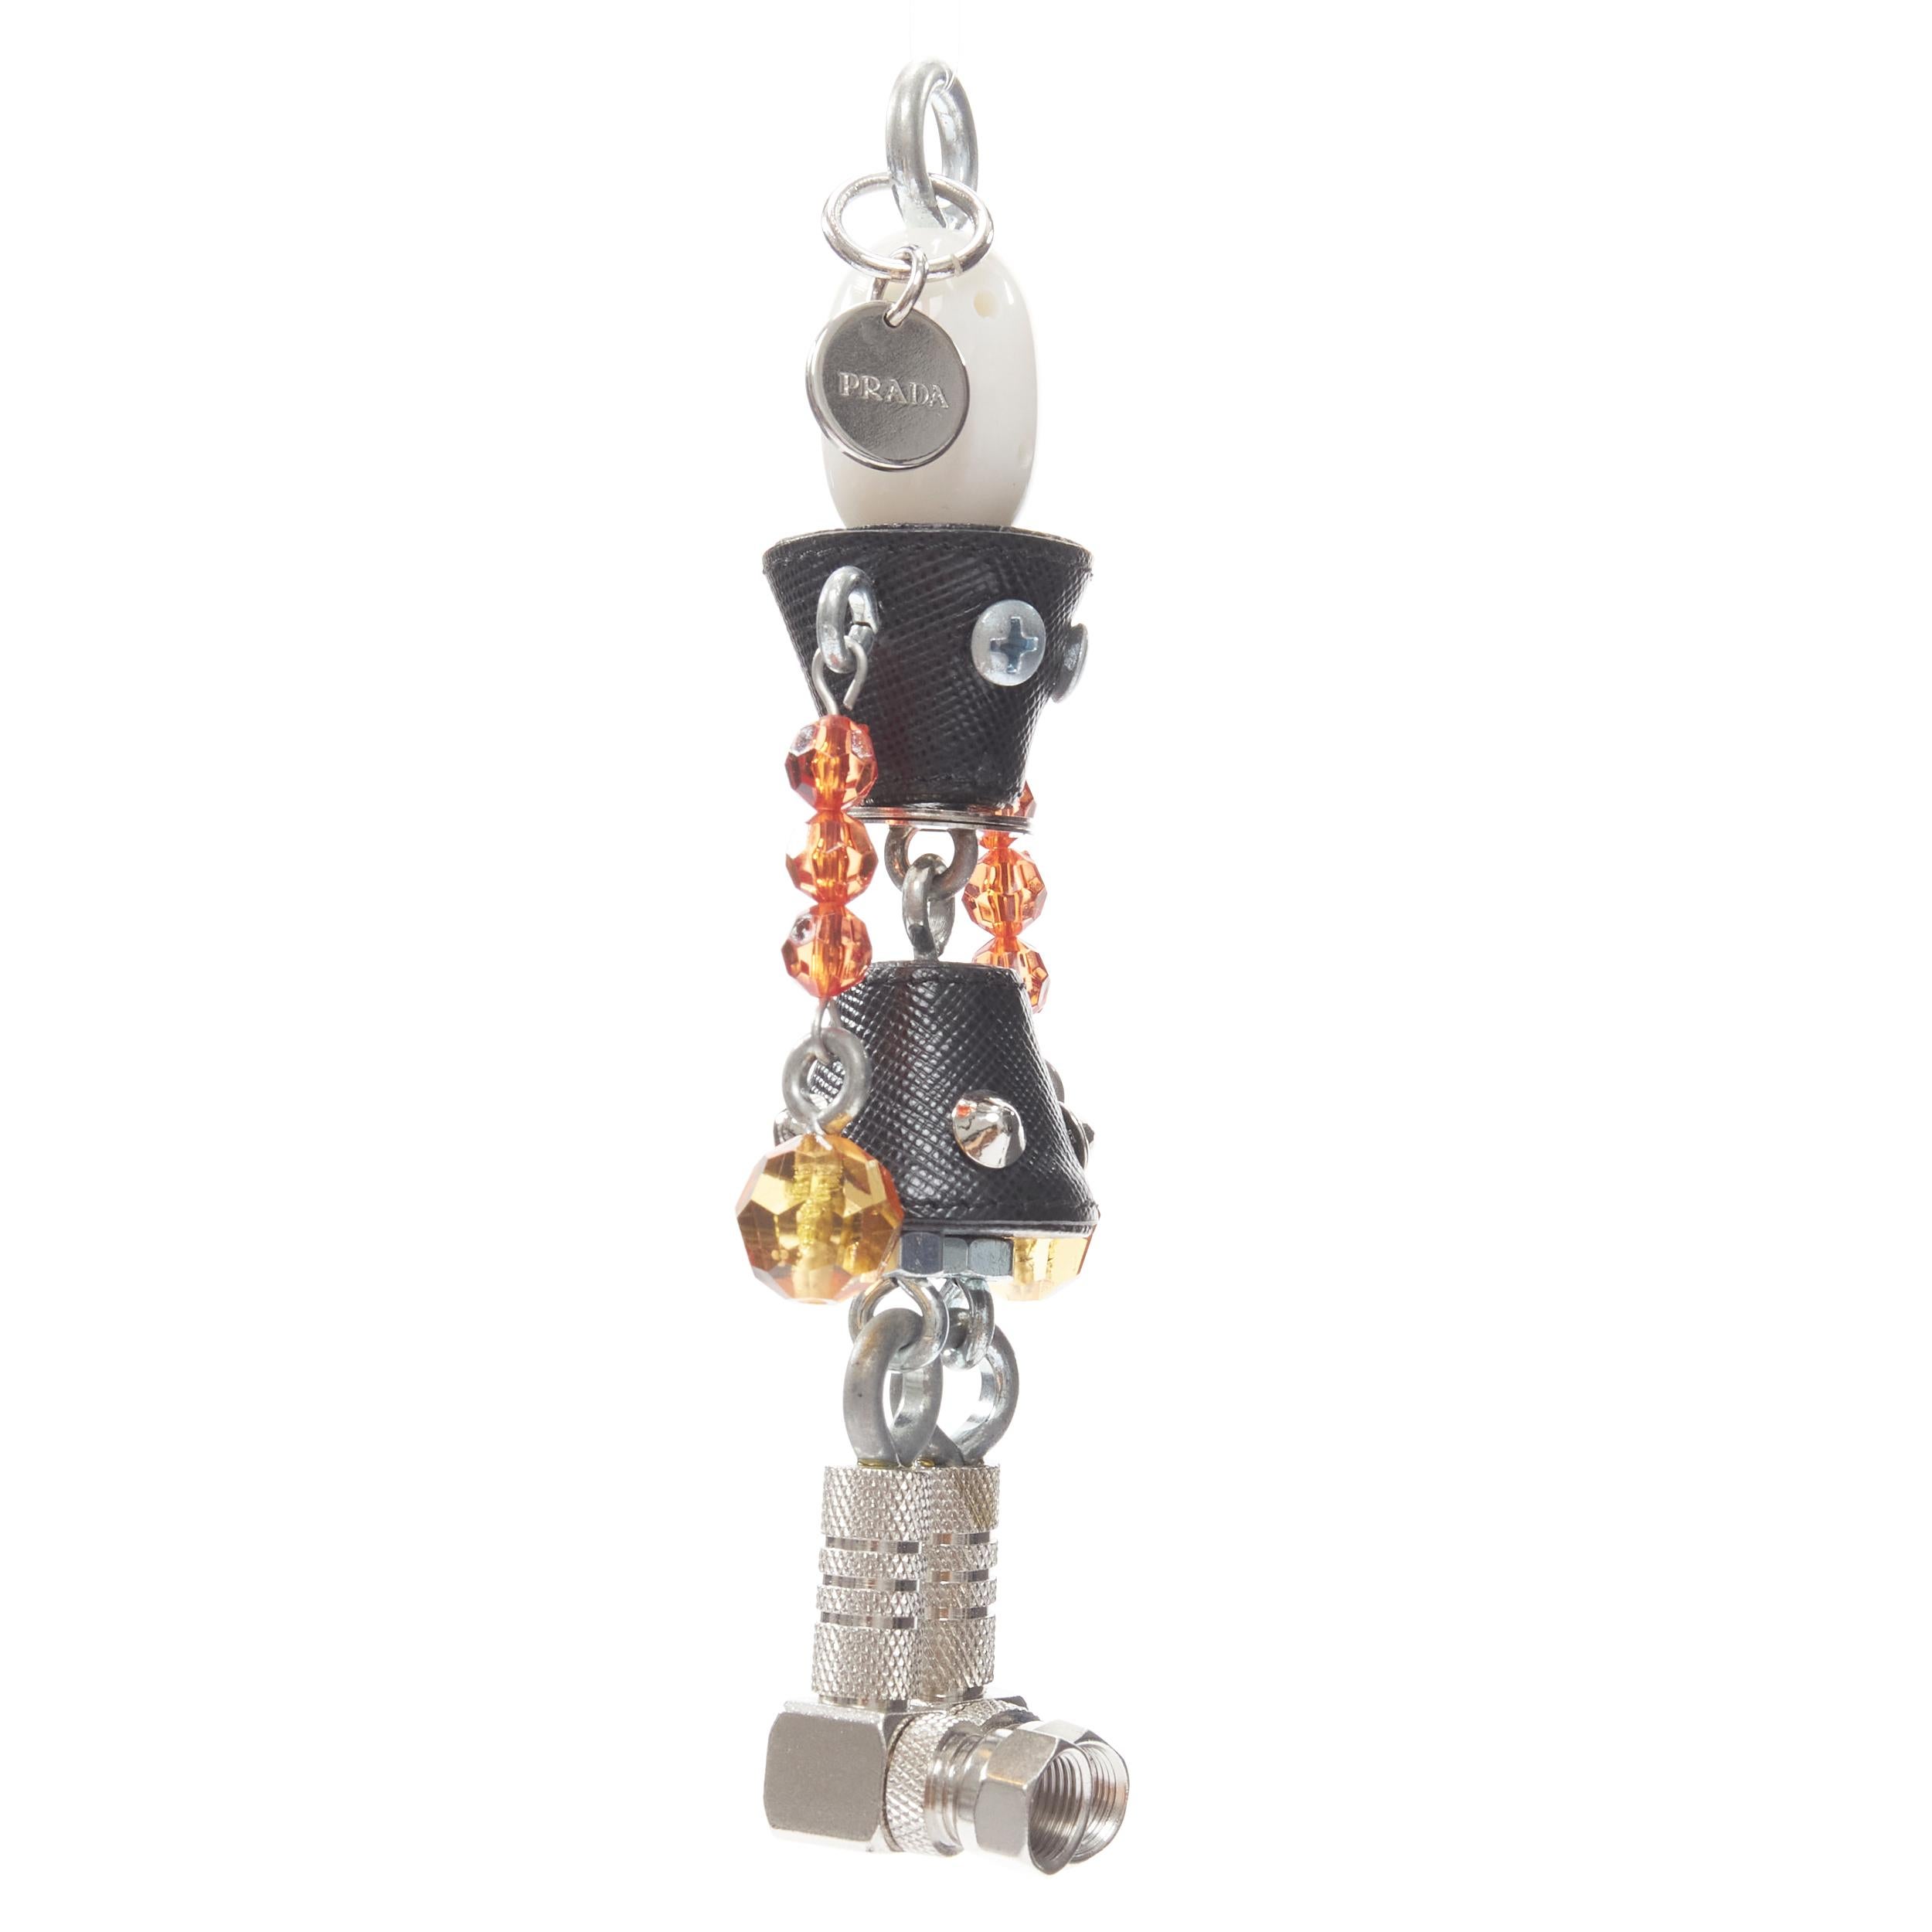 new PRADA pearl resin head beaded arms saffiano bolt hardware keychain bag charm 
Reference: TGAS/B01414 
Brand: Prada 
Material: Leather 
Color: Black 
Pattern: Solid 
Extra Detail: Pearlescent resin head. Black saffiano body. Silver hardware bolt.